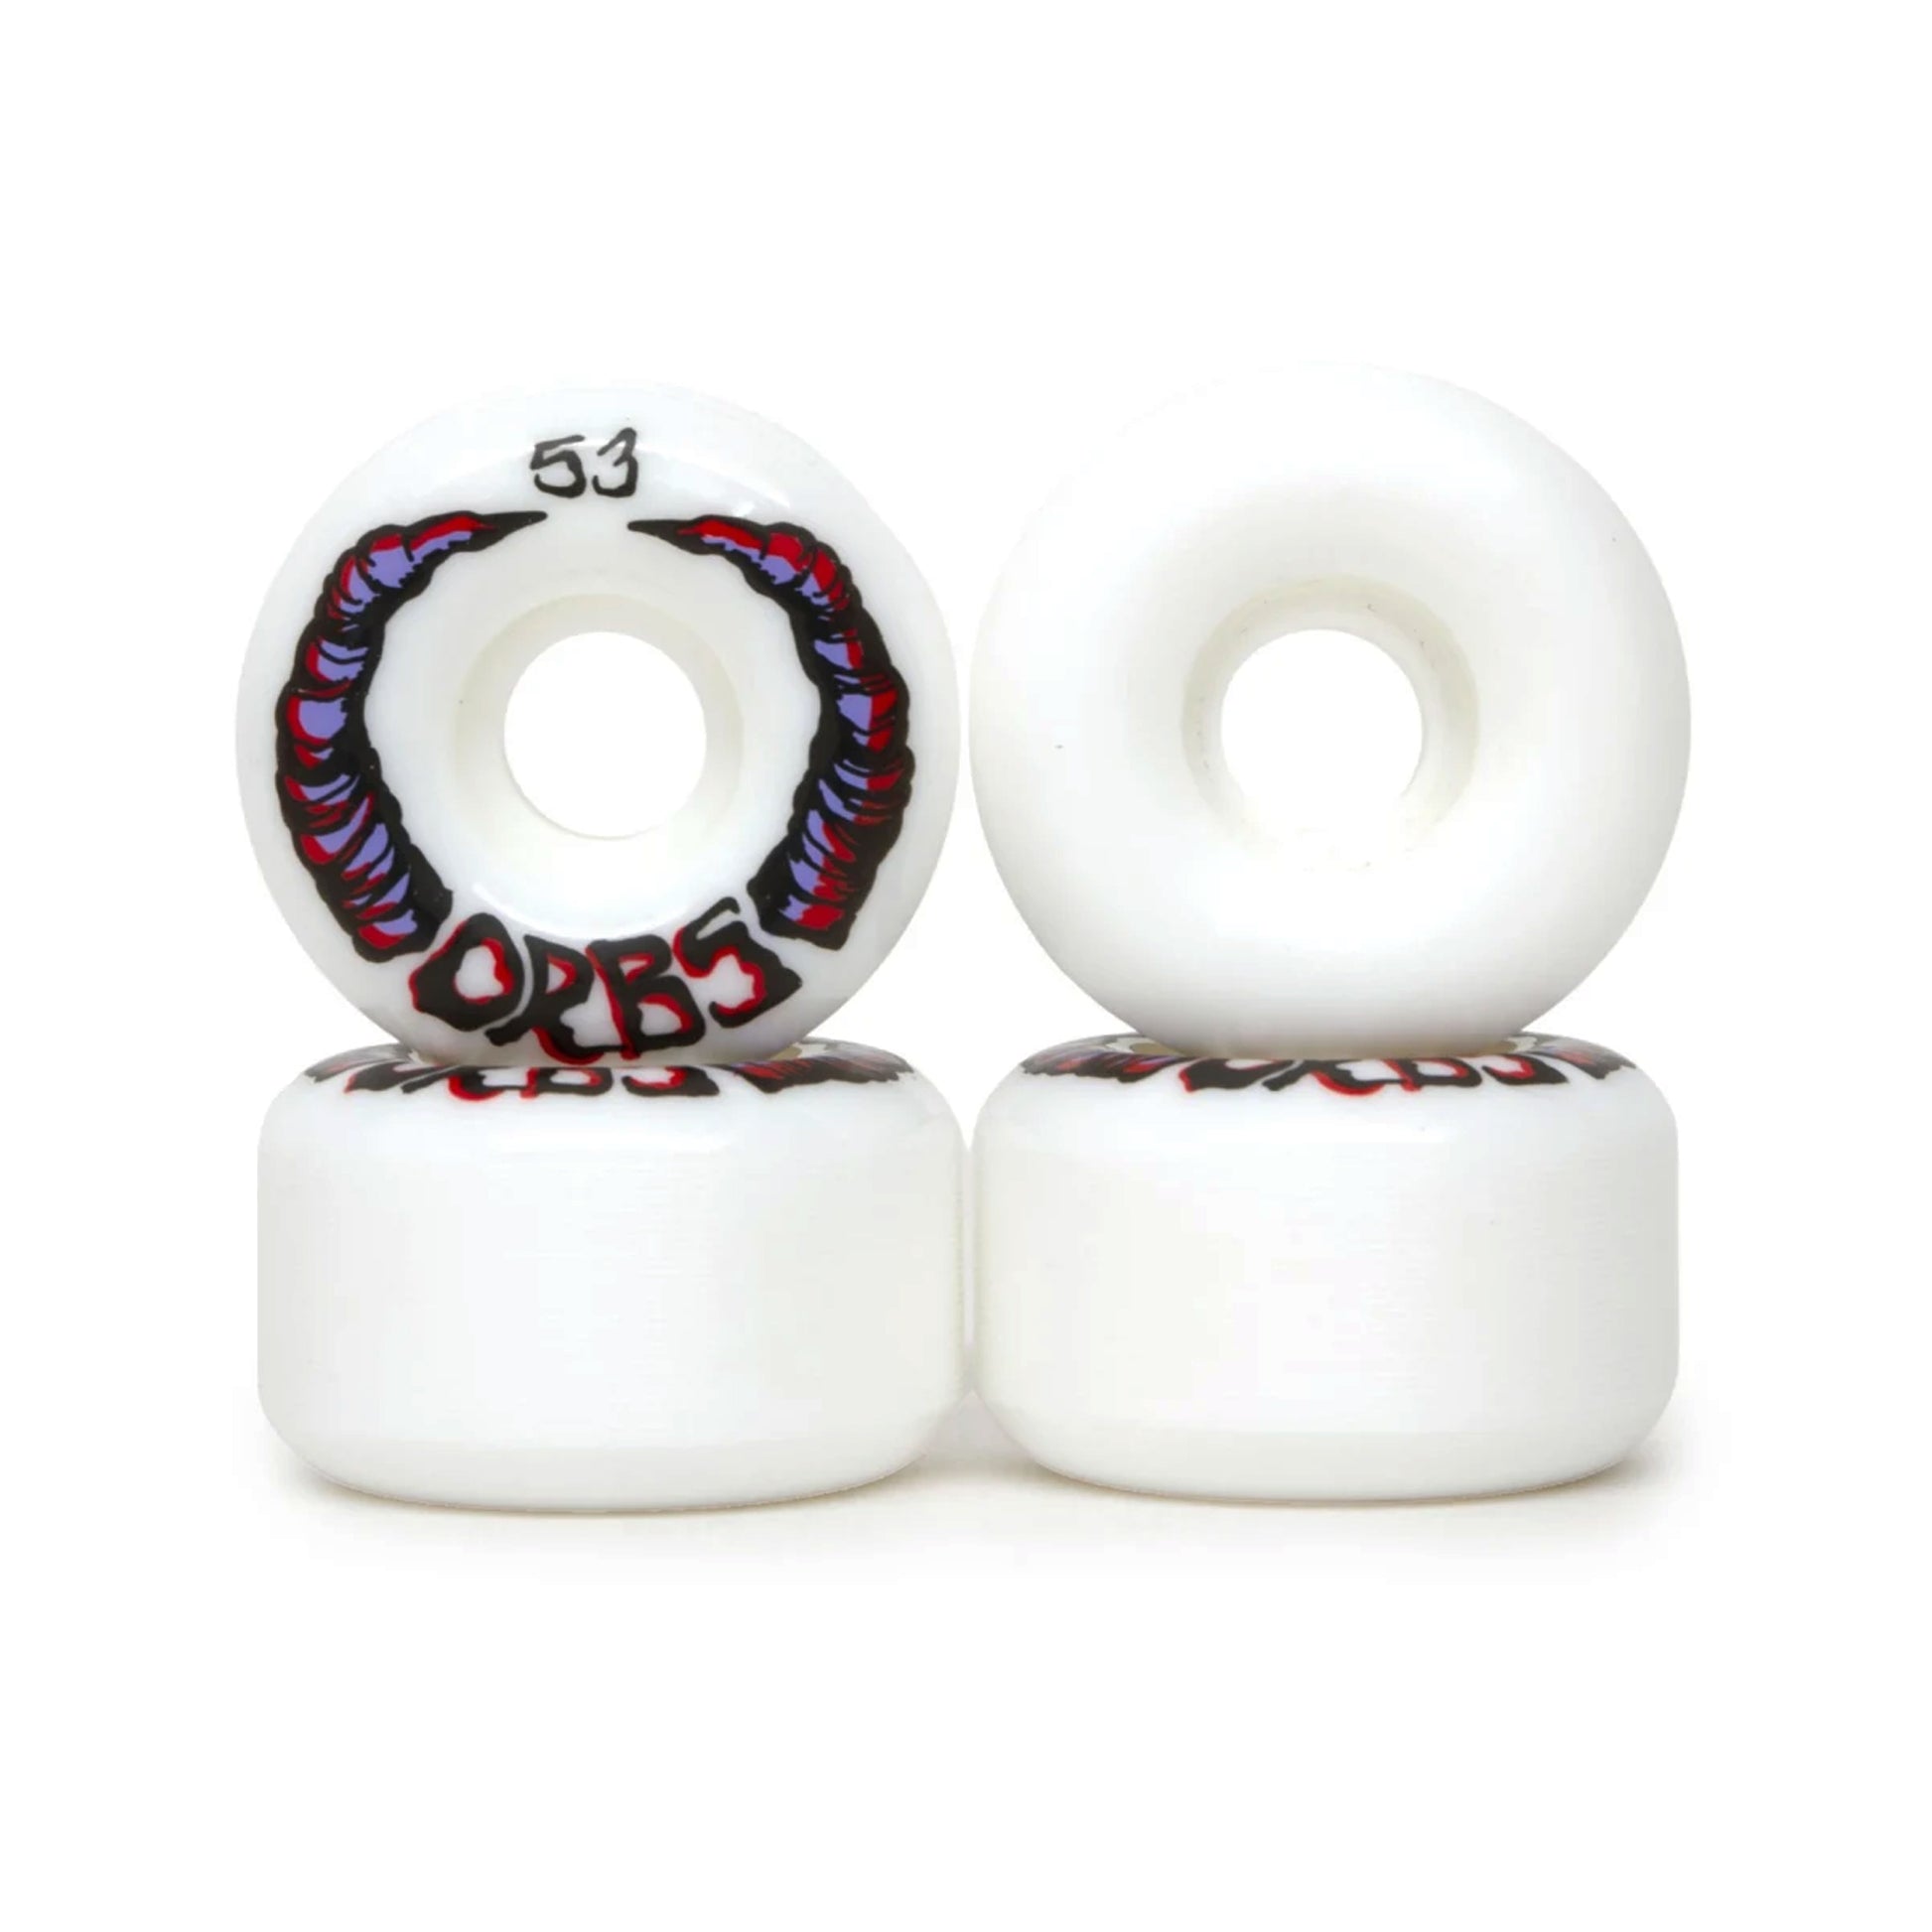 Orbs - 53mm - 99a - Apparitions - White - Prime Delux Store